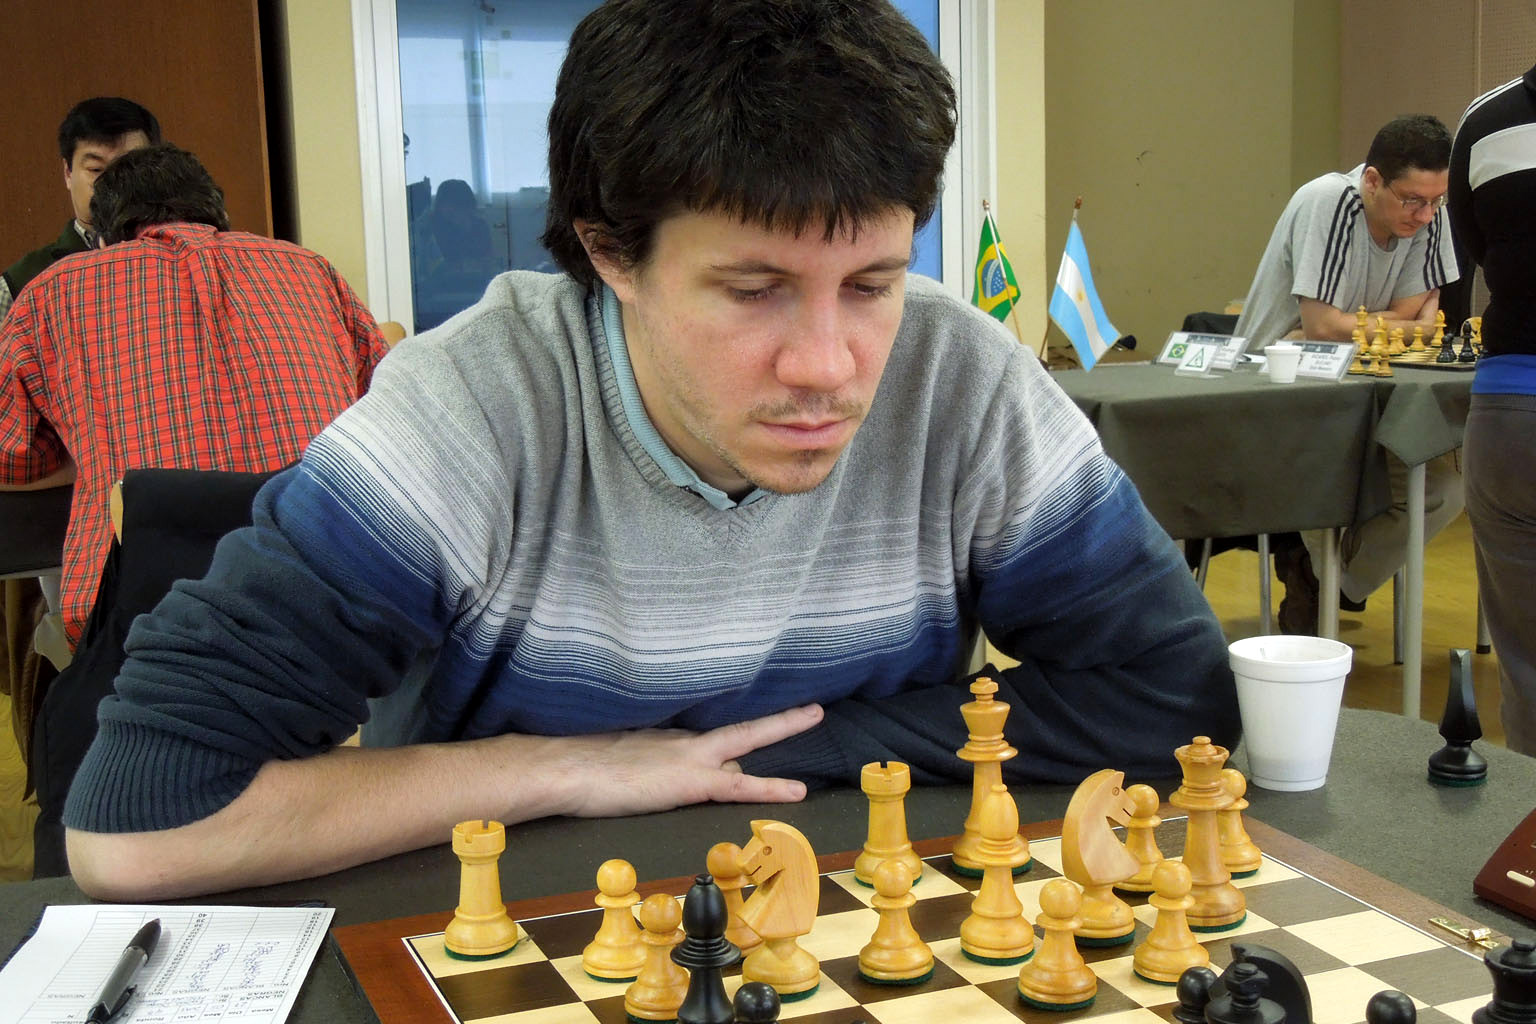 The chess games of Diego Flores